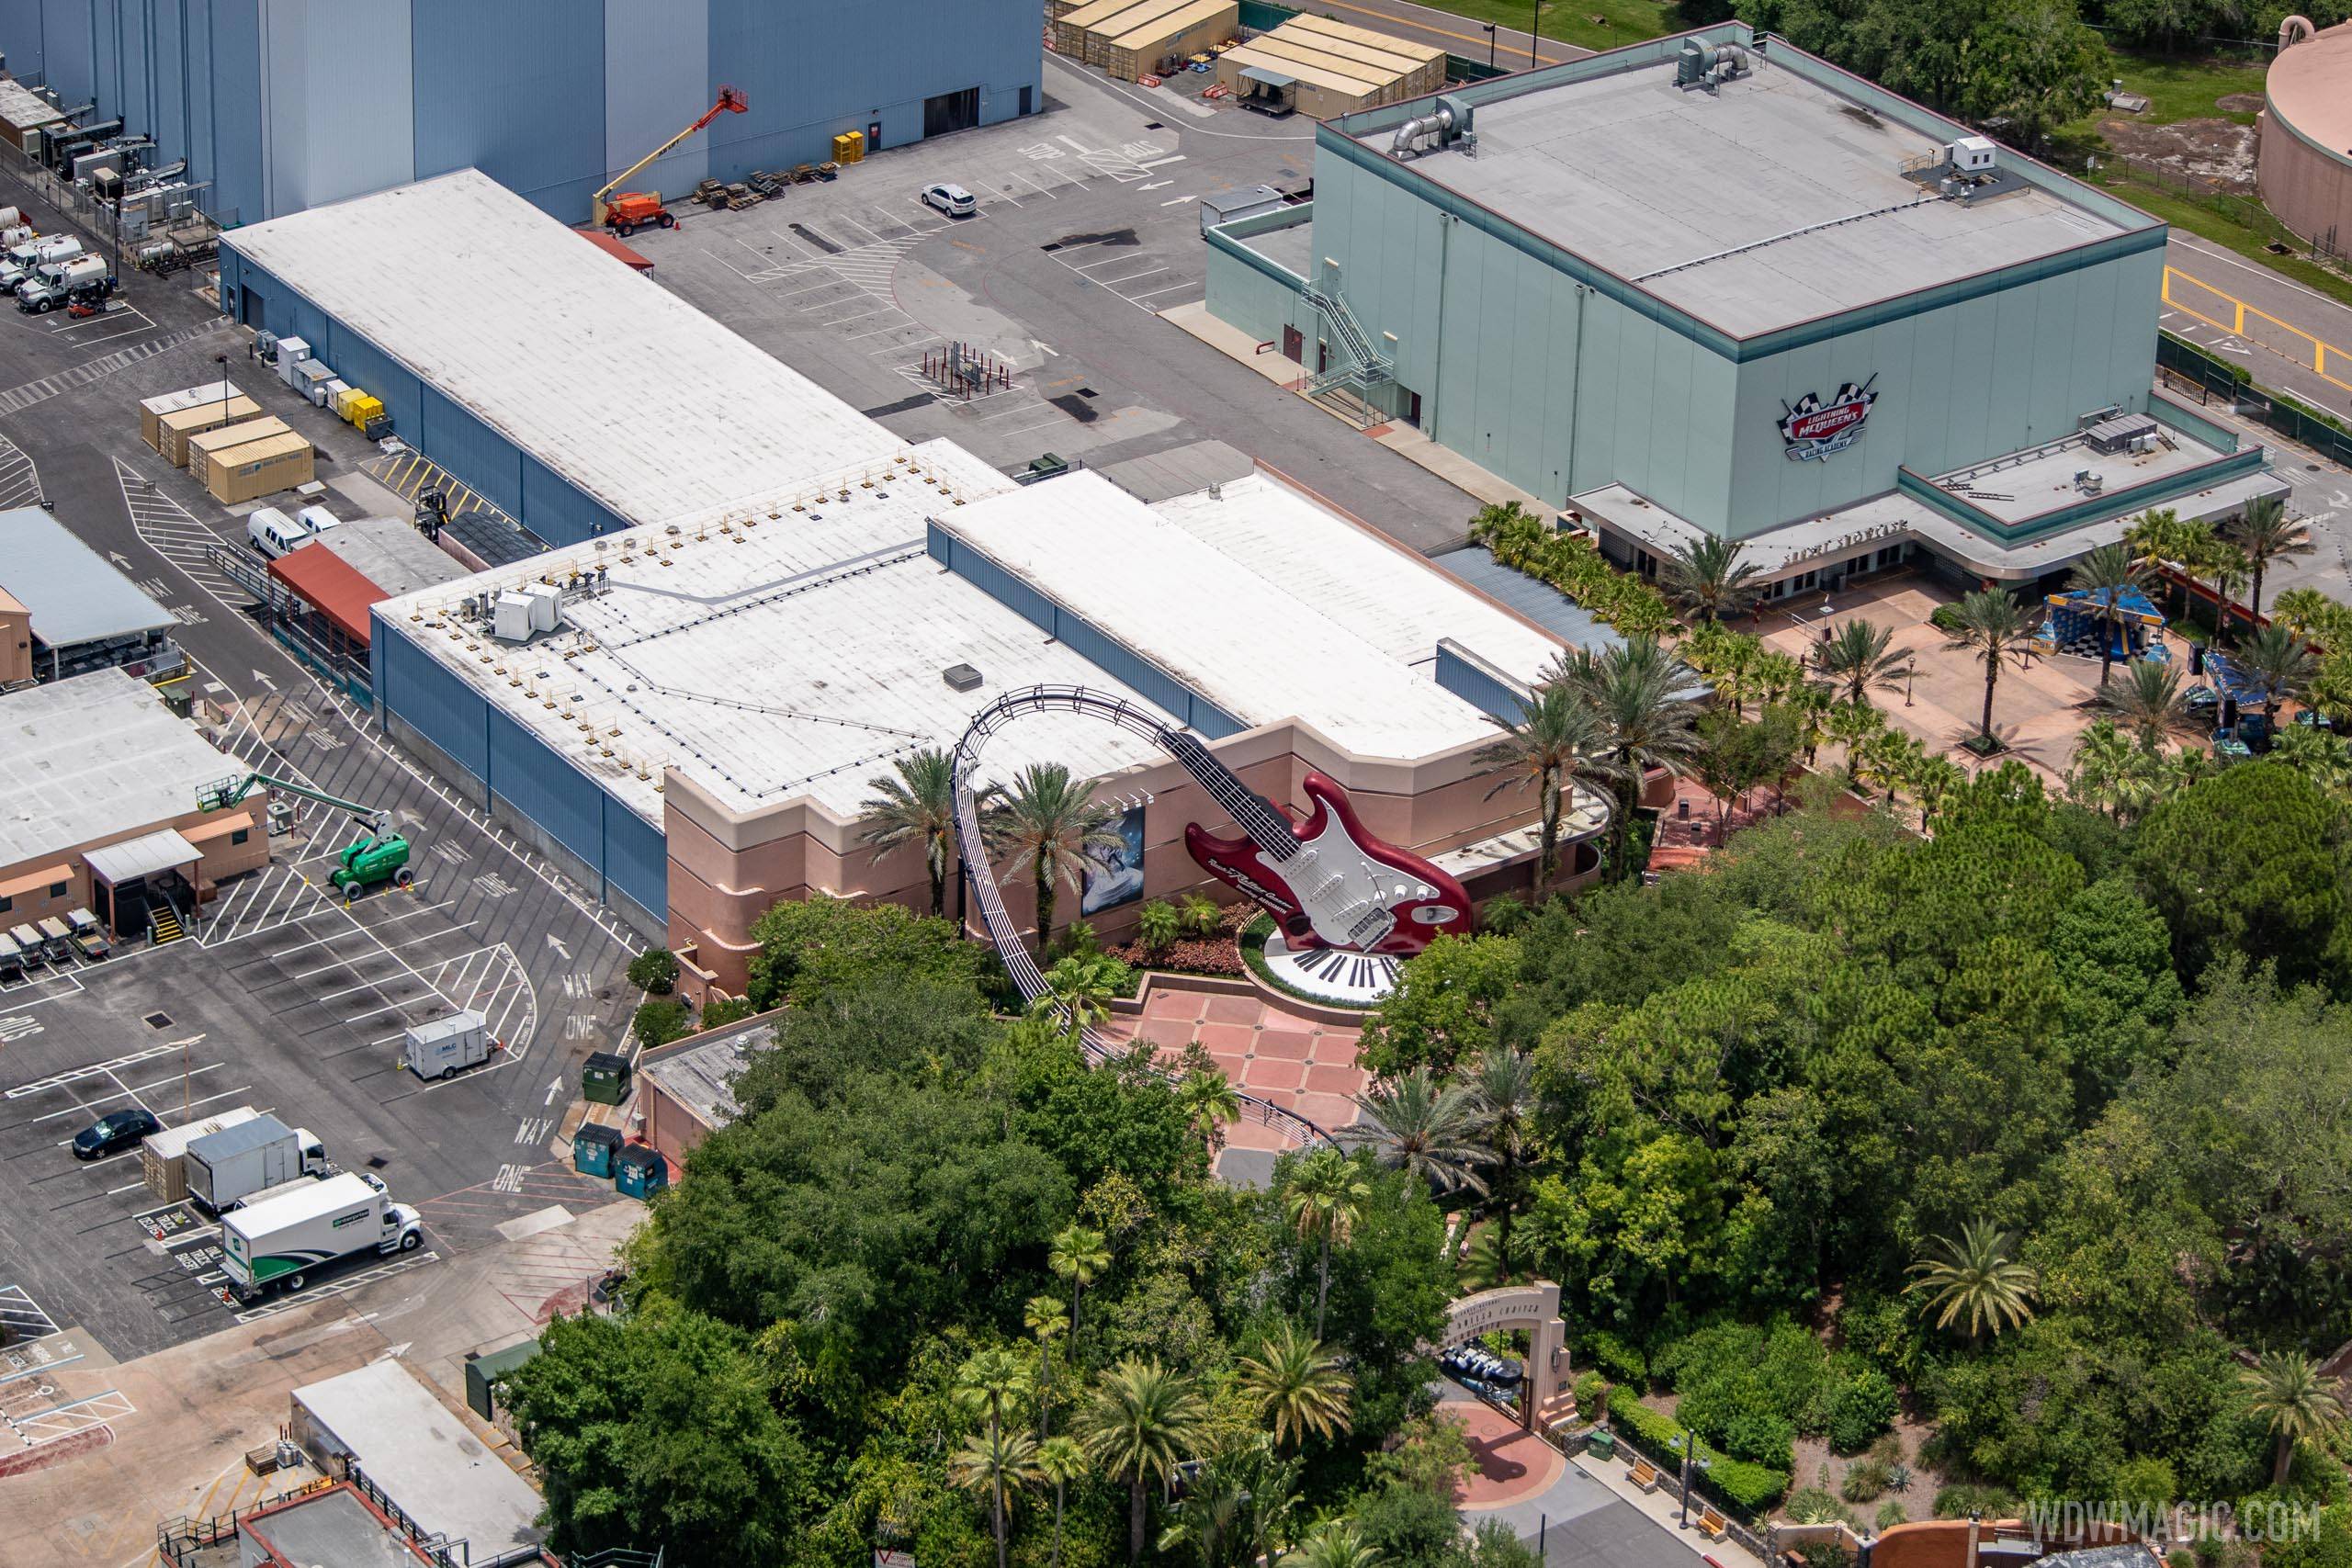 Rock 'N' Roller Coaster Now Closed for Lengthy Refurb 